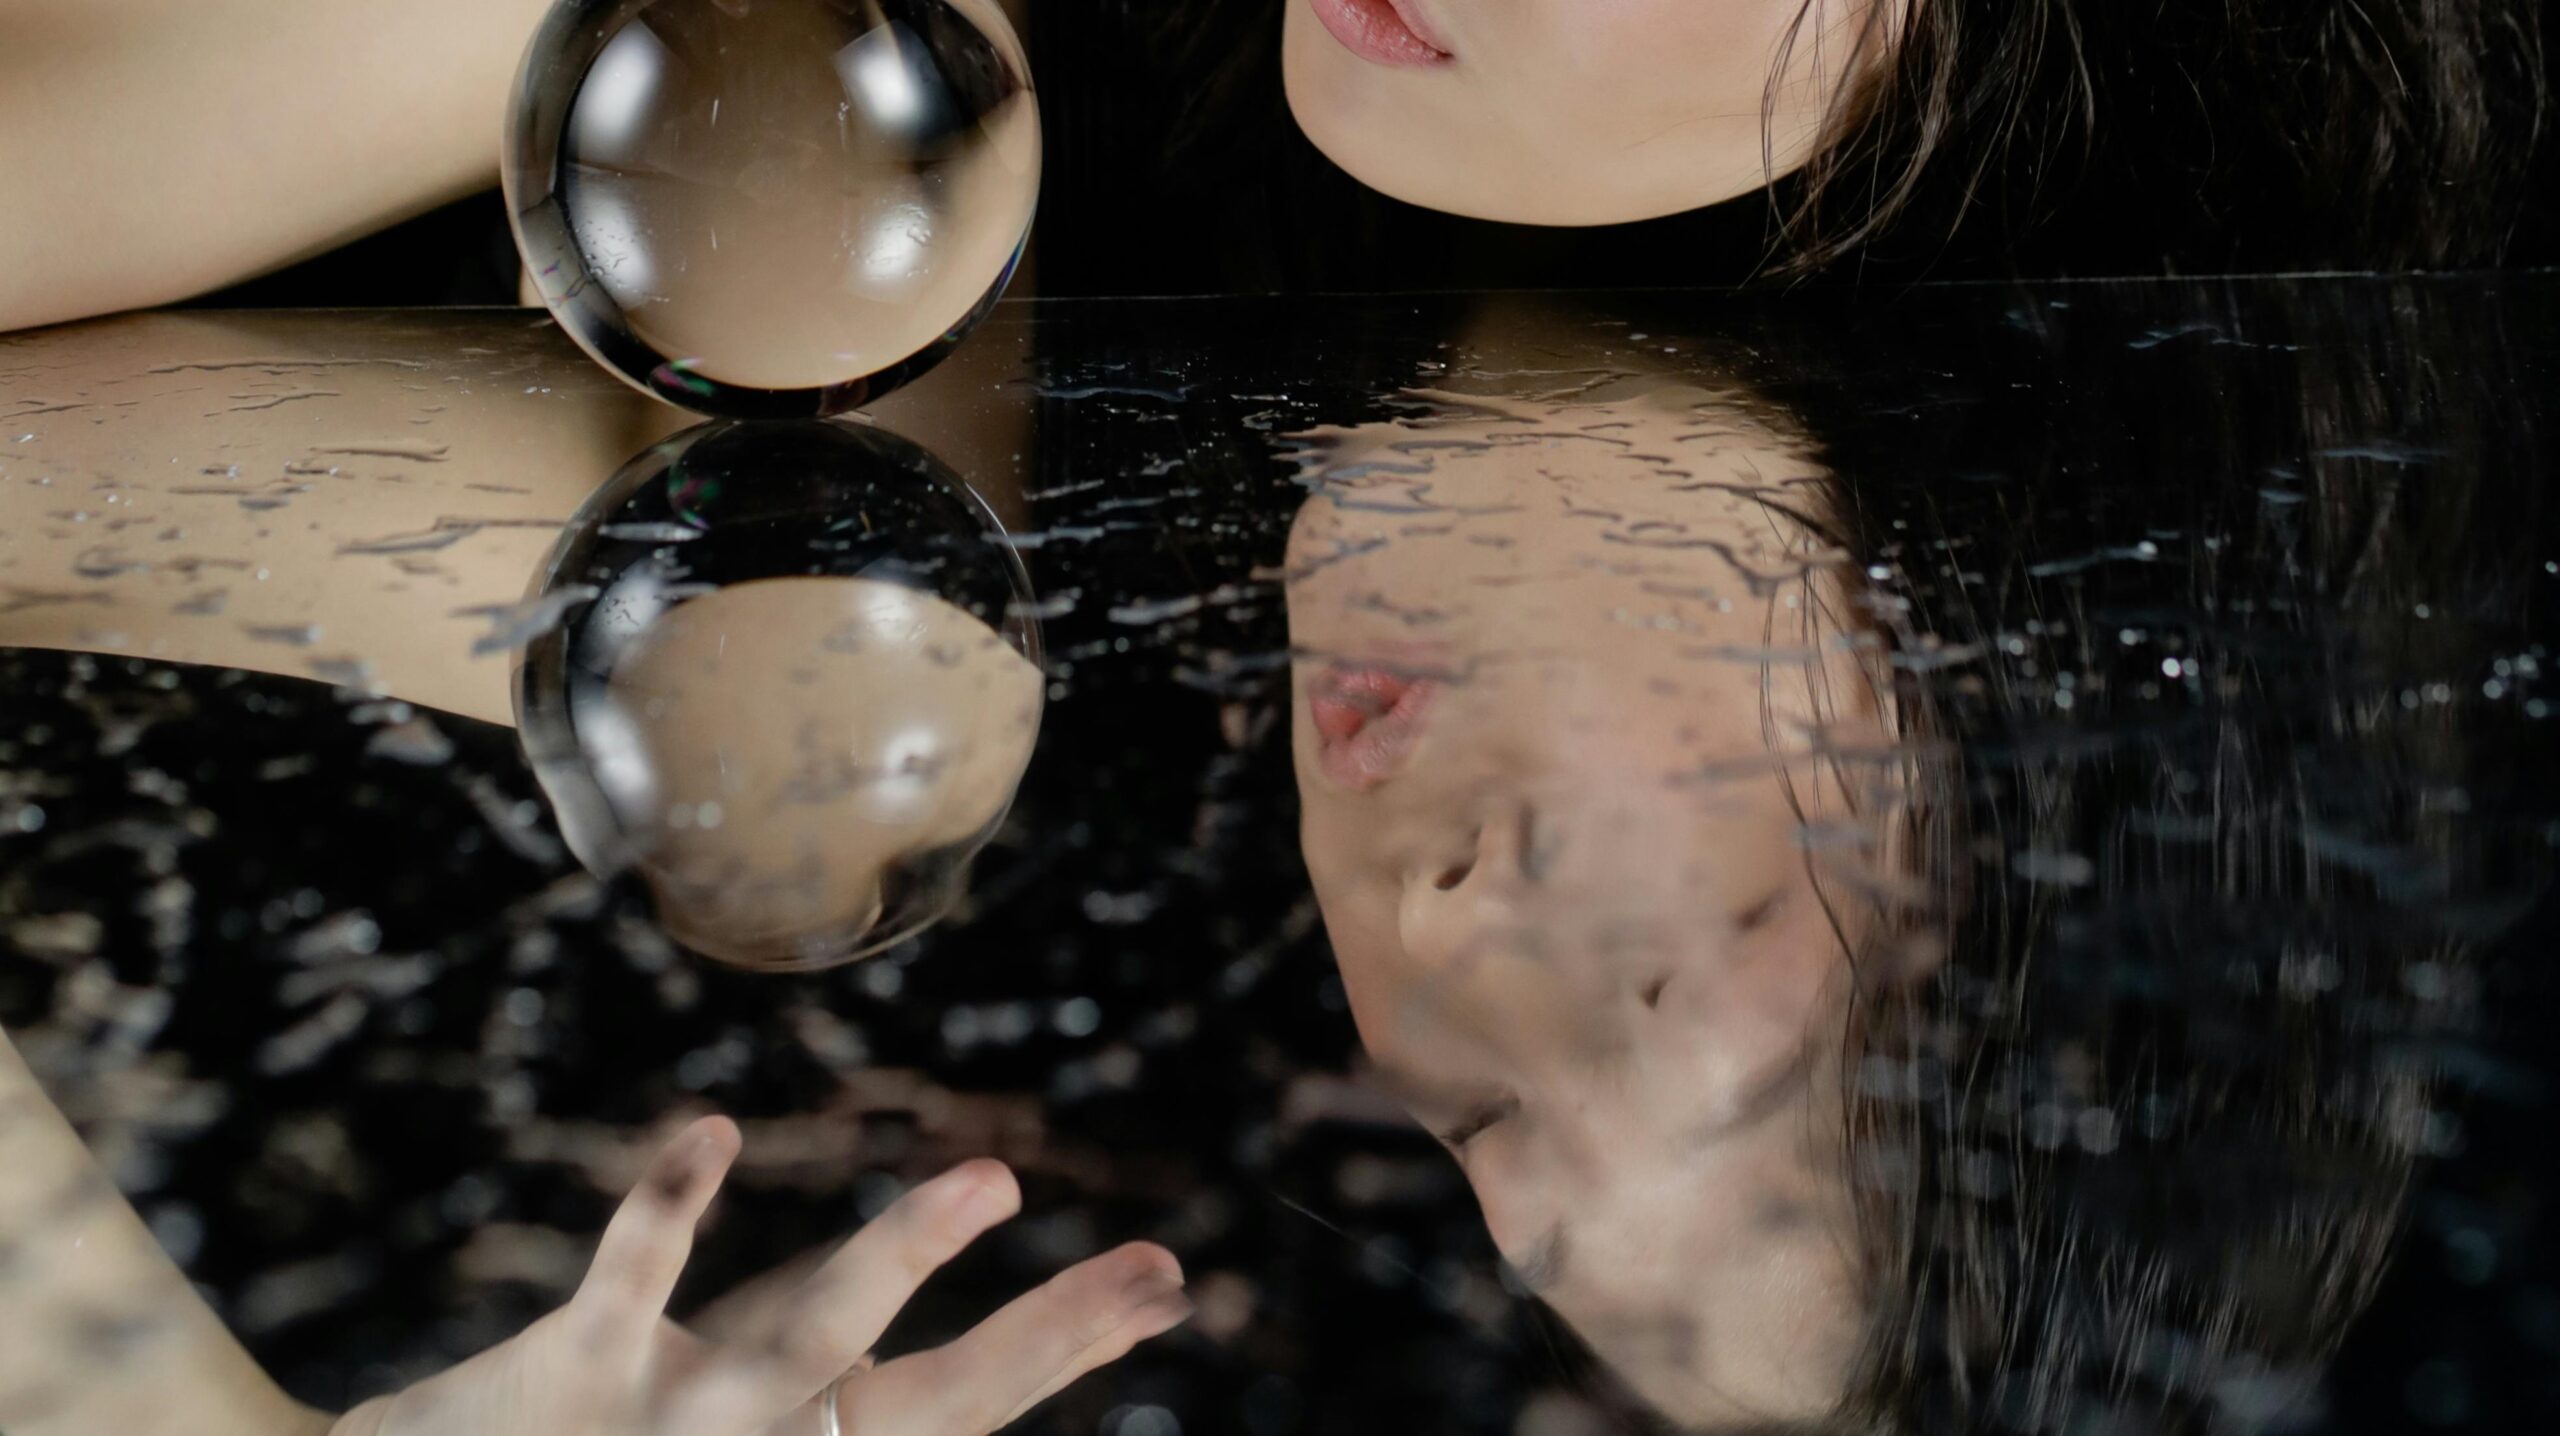 Photo shows watery reflection of a young woman's face, against a black background.